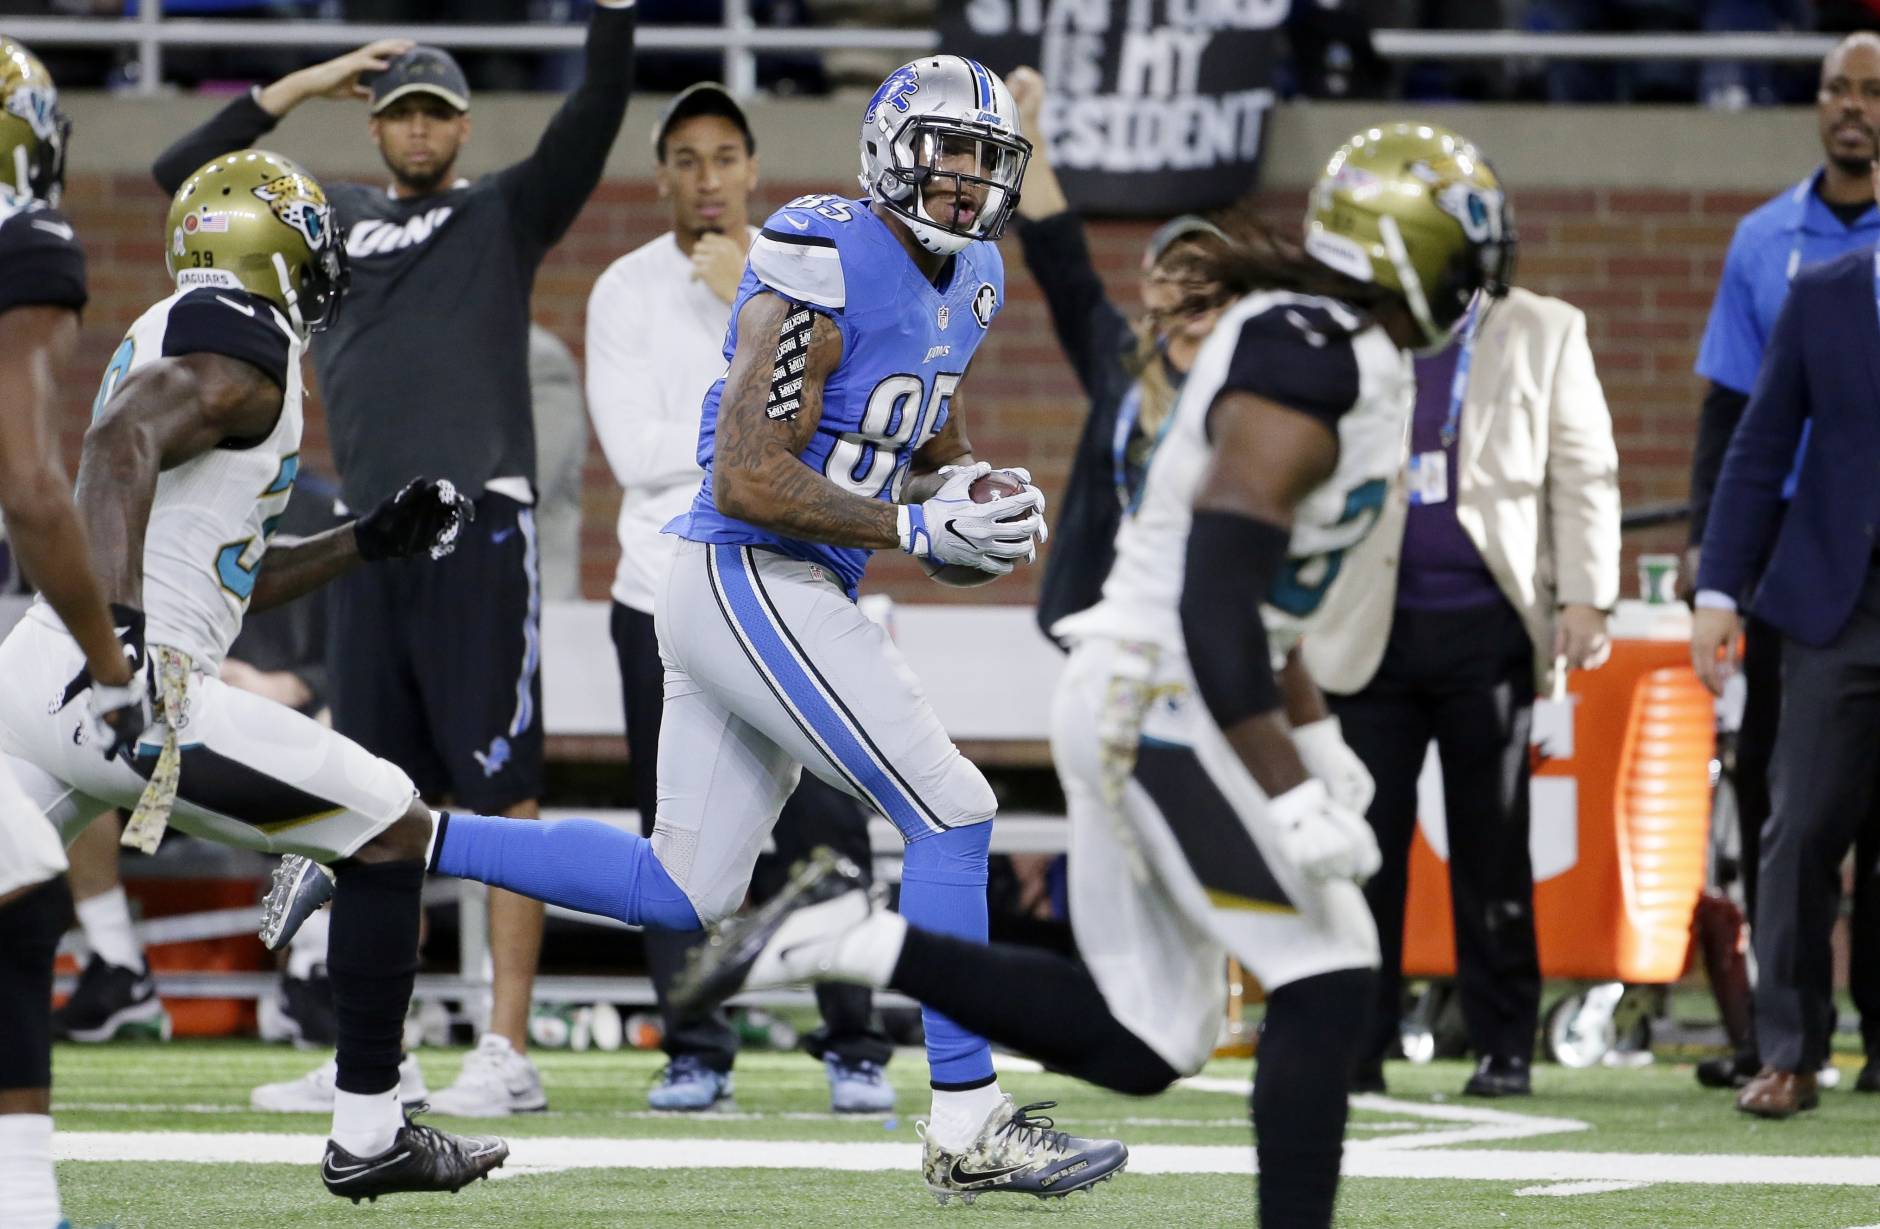 Detroit Lions tight end Eric Ebron runs downfield during the second half of an NFL football game against the Jacksonville Jaguars, Sunday, Nov. 20, 2016 in Detroit. (AP Photo/Duane Burleson)